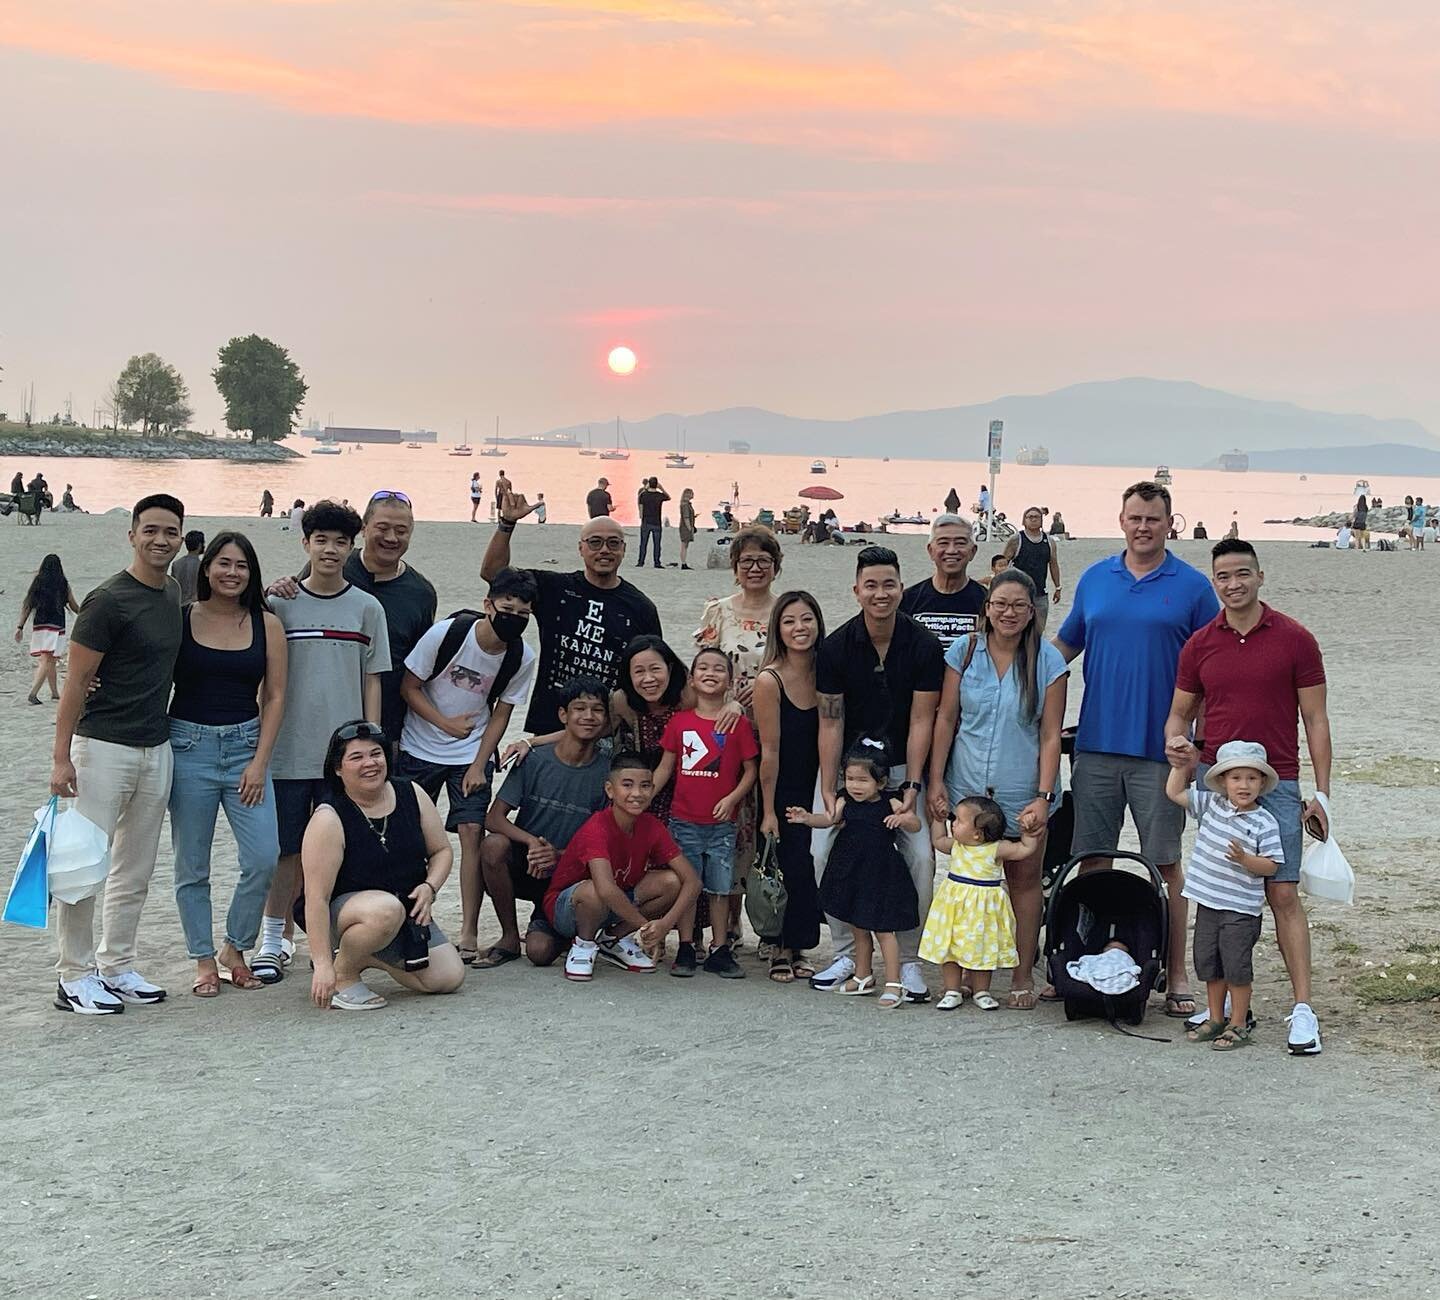 Family and Sunsets 🌅 
.

#realestate #realtor #fairview #vancouver #olympicvillage #mountpleasant #vancouverwest #vancouvereast #eastvan #vancity #seawall #stanleypark #westend #woodwardsbuilding #kitsilano #kits #englishbay #daviestreet #robsonstre